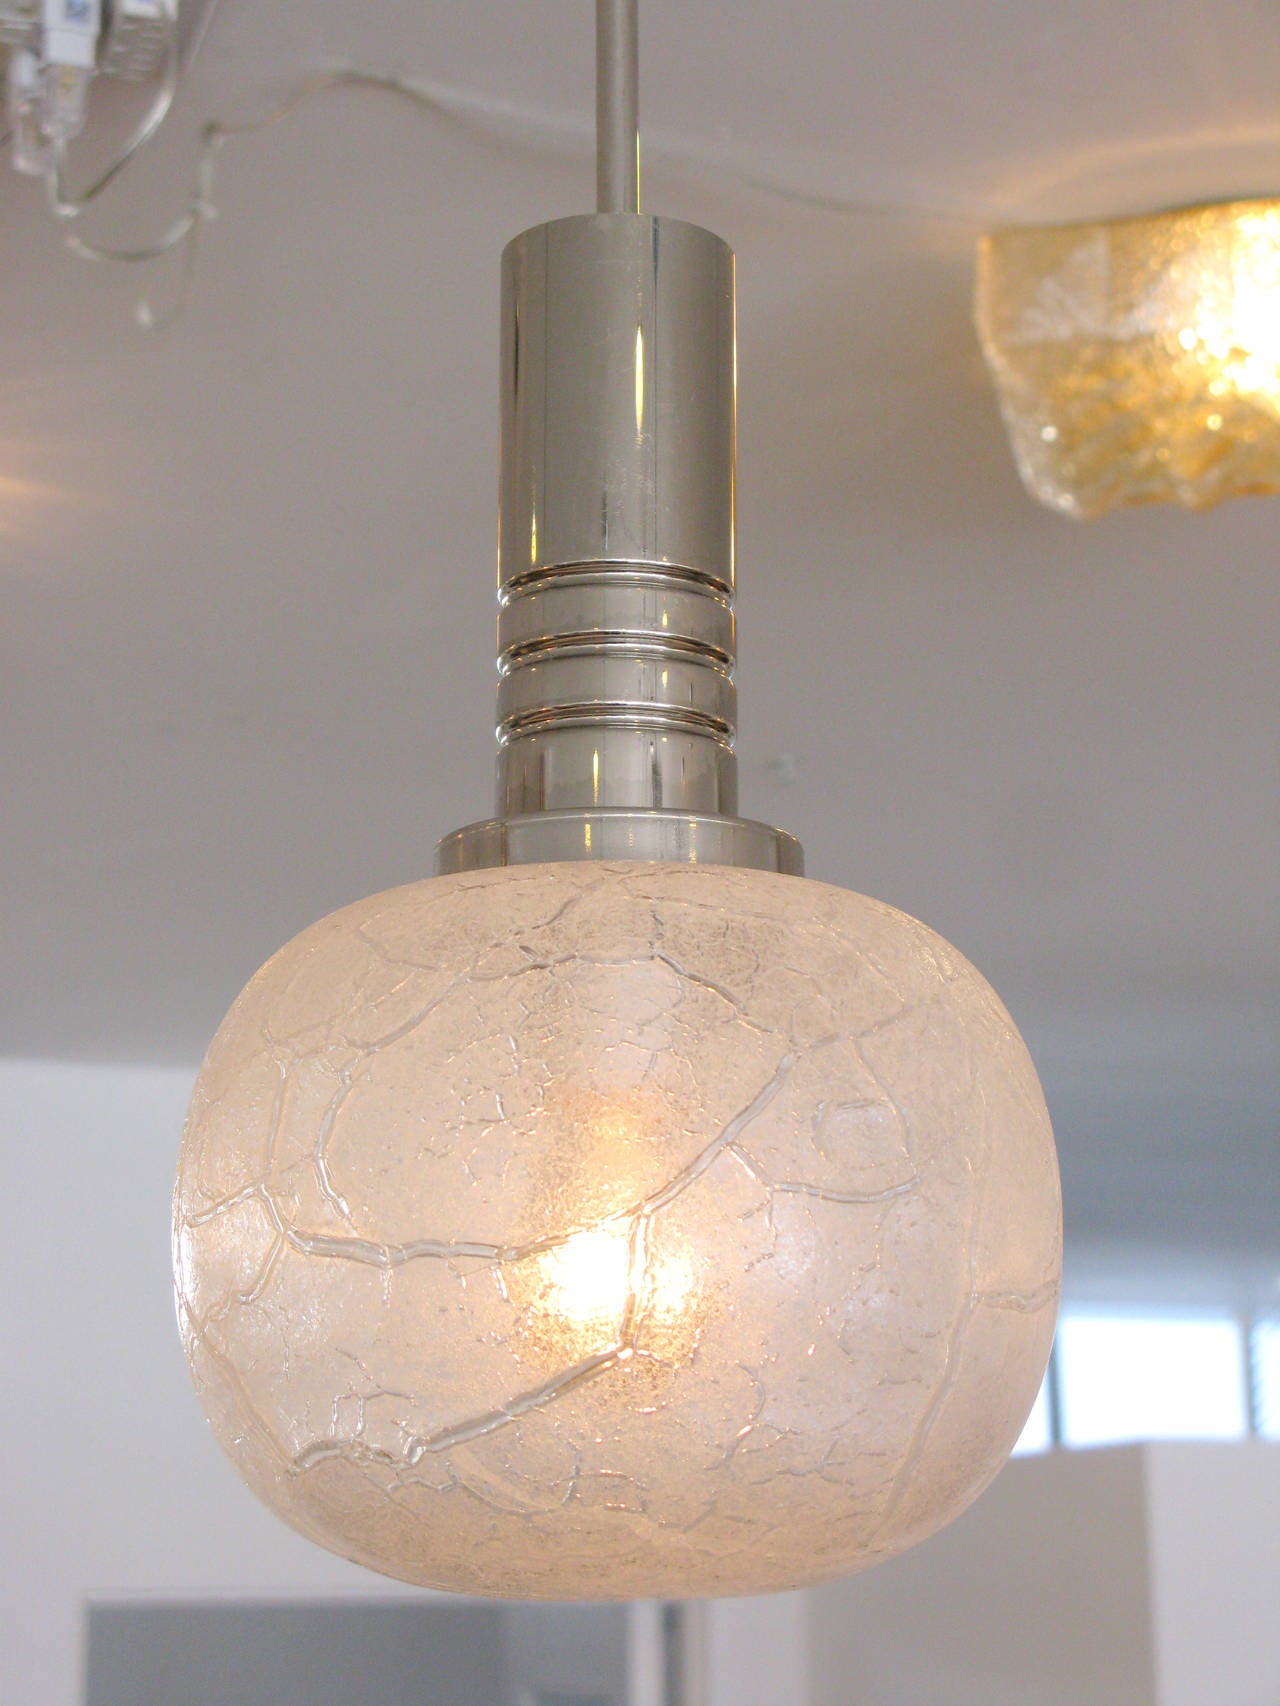 German Trio of Crackled Ice Glass Pendant Lights